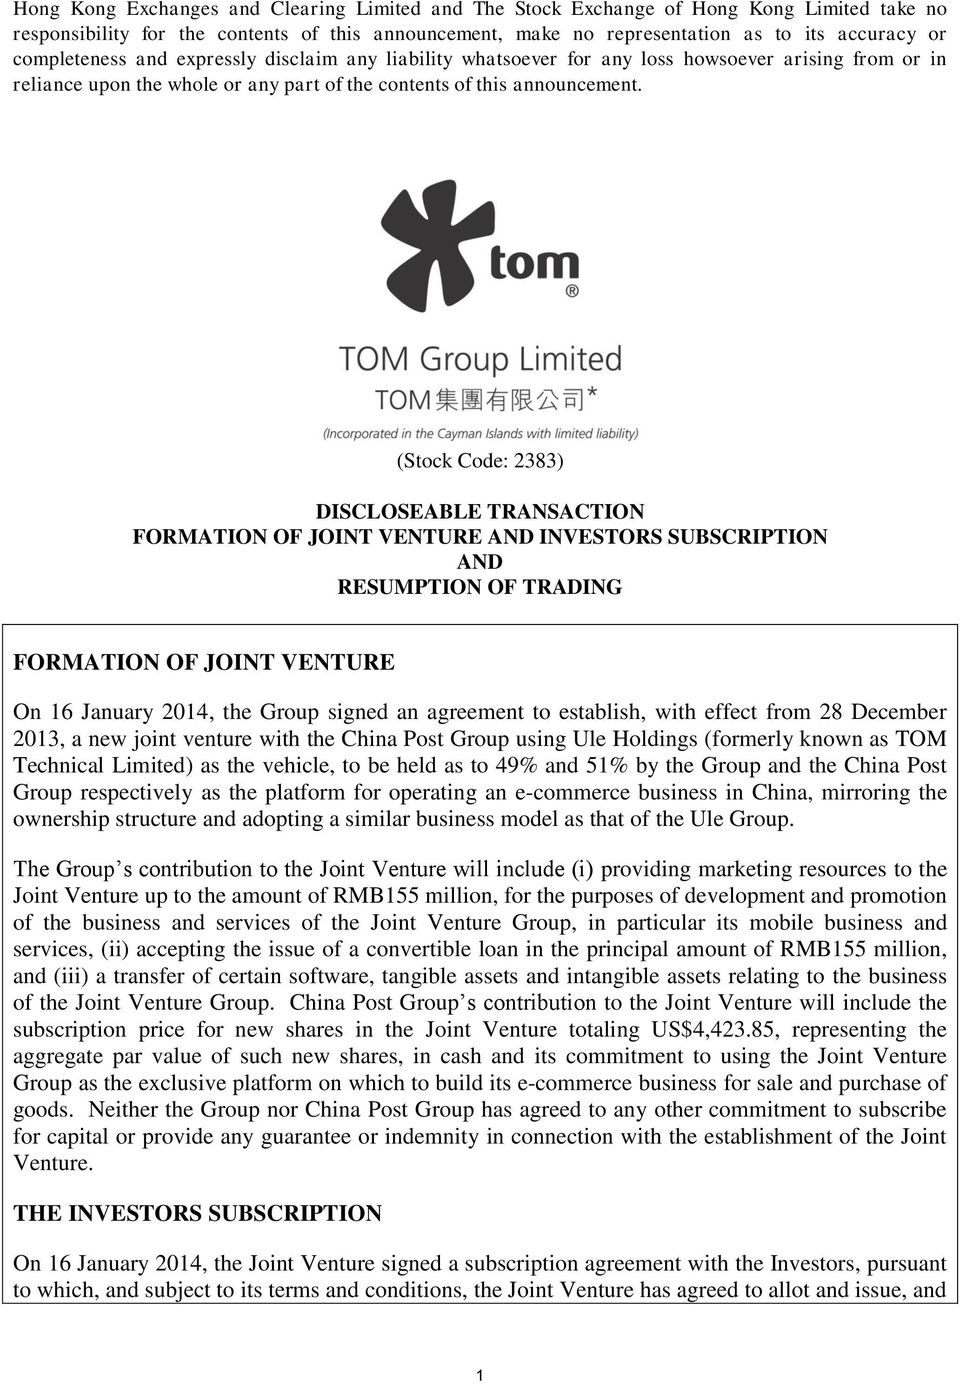 (Stock Code: 2383) DISCLOSEABLE TRANSACTION FORMATION OF JOINT VENTURE AND INVESTORS SUBSCRIPTION AND RESUMPTION OF TRADING FORMATION OF JOINT VENTURE On 16 January 2014, the Group signed an